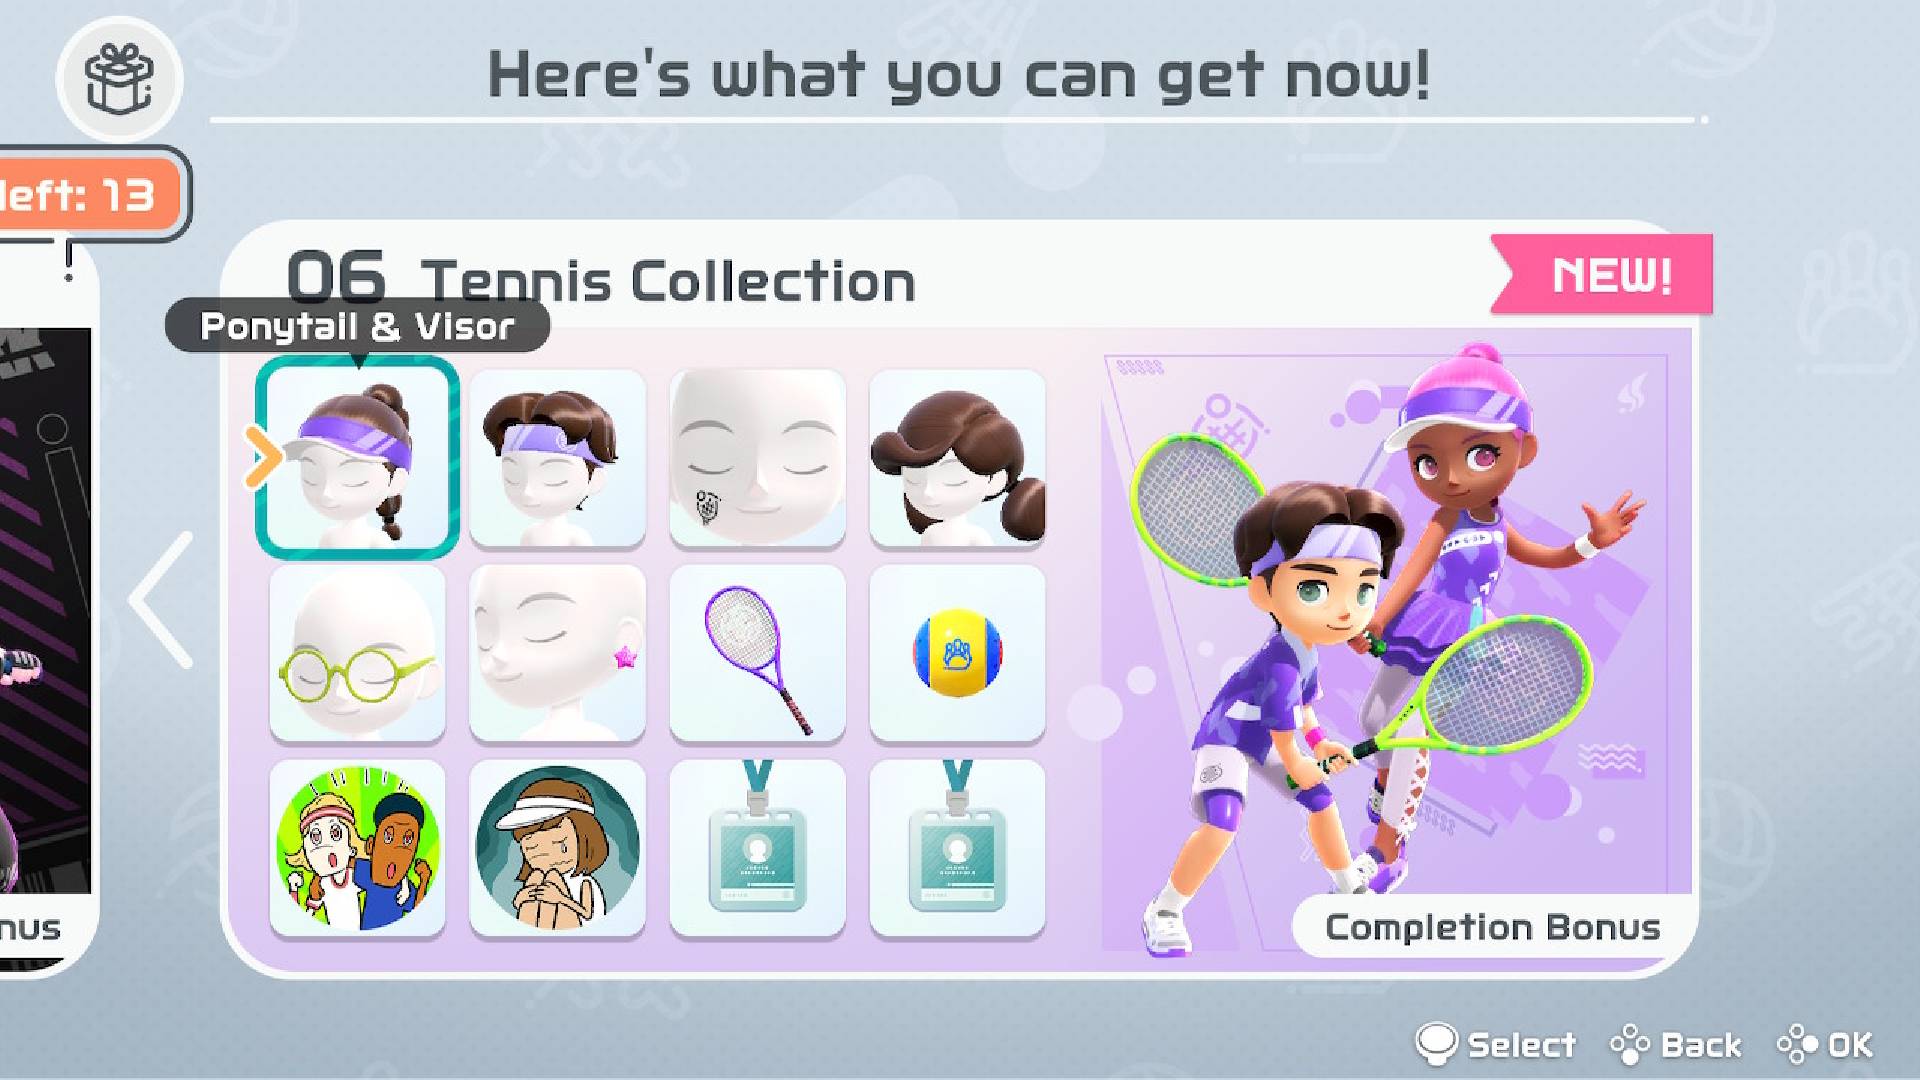 Nintendo Switch Sports cosmetics: a pair of player avatars from Nintendo Switch Sports are wearing colourful tennis outfits